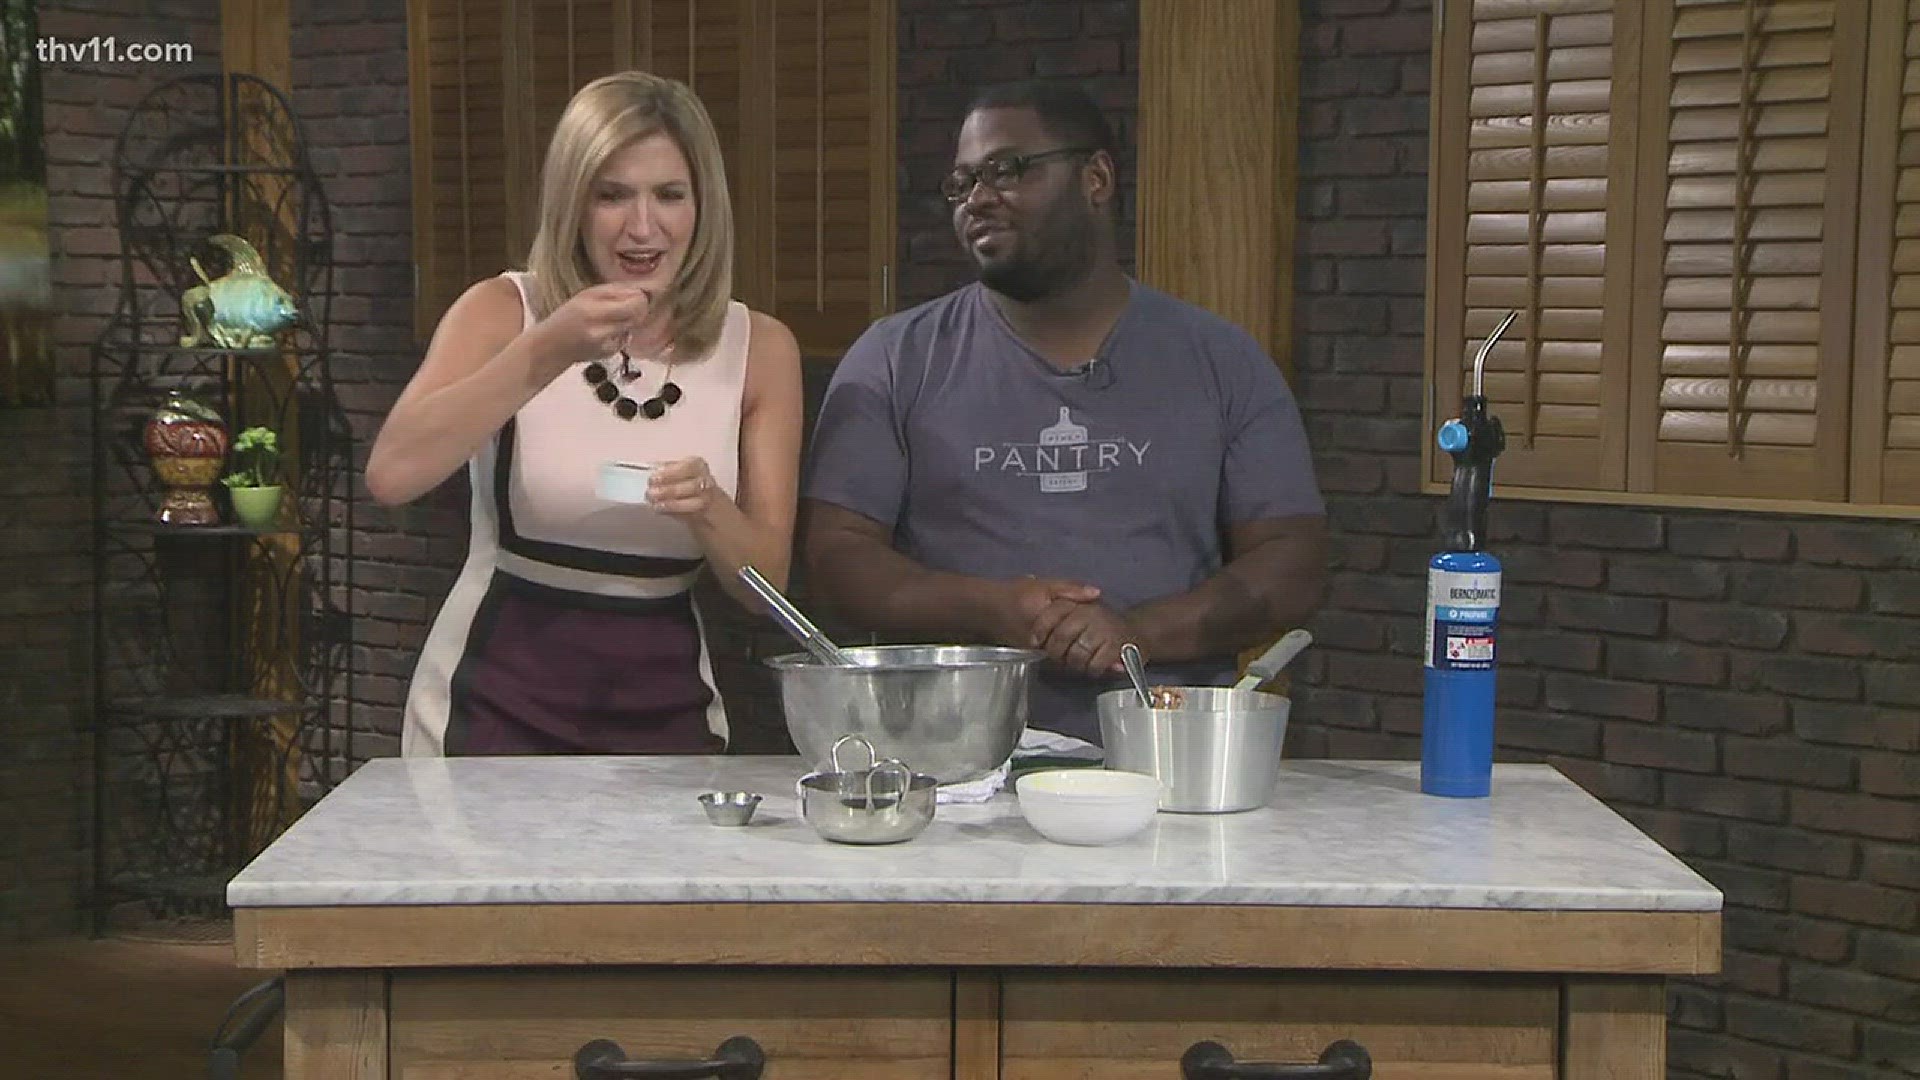 It's National Creme Brulee Day and Titus Holly came in to show us how to make the flame-kissed treat.